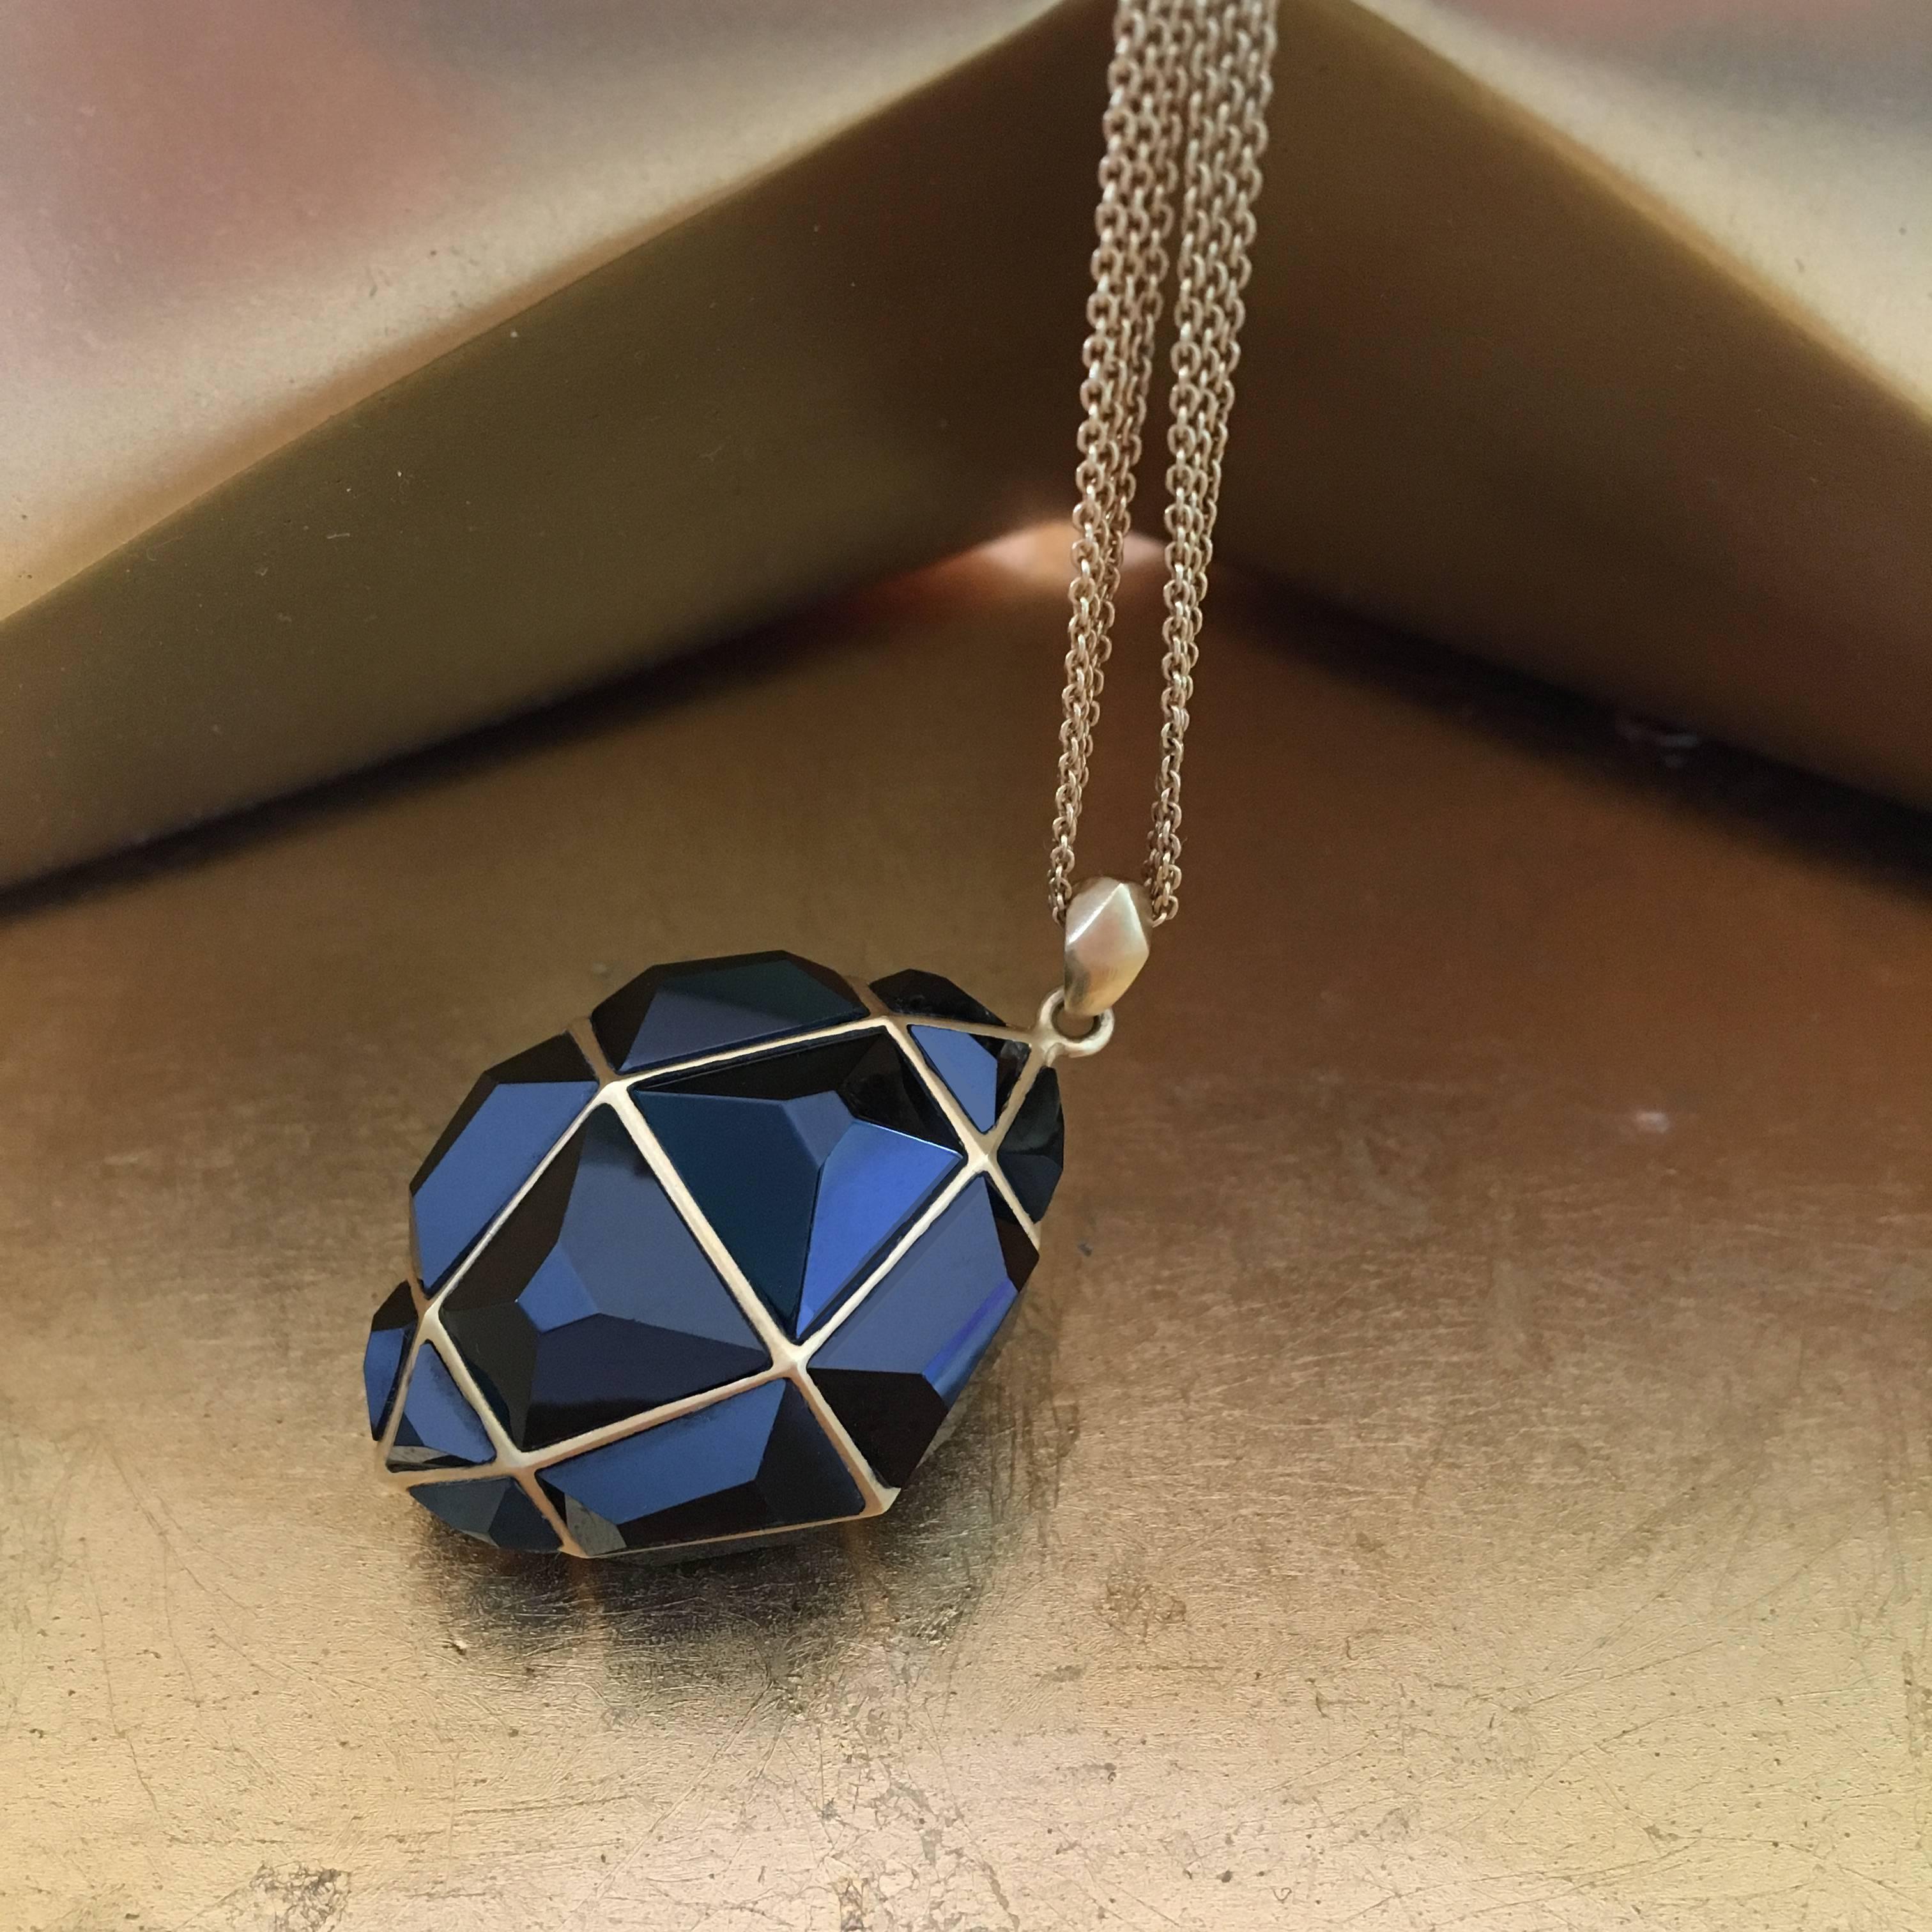 Fierce and strong, this Black Spinel and 18kt Gold necklace will certainly get you noticed.  A geometric puzzle of separately cut black spinel pieces set into one single pendant, this piece is striking and reflective.  Set in Lauren Harper's